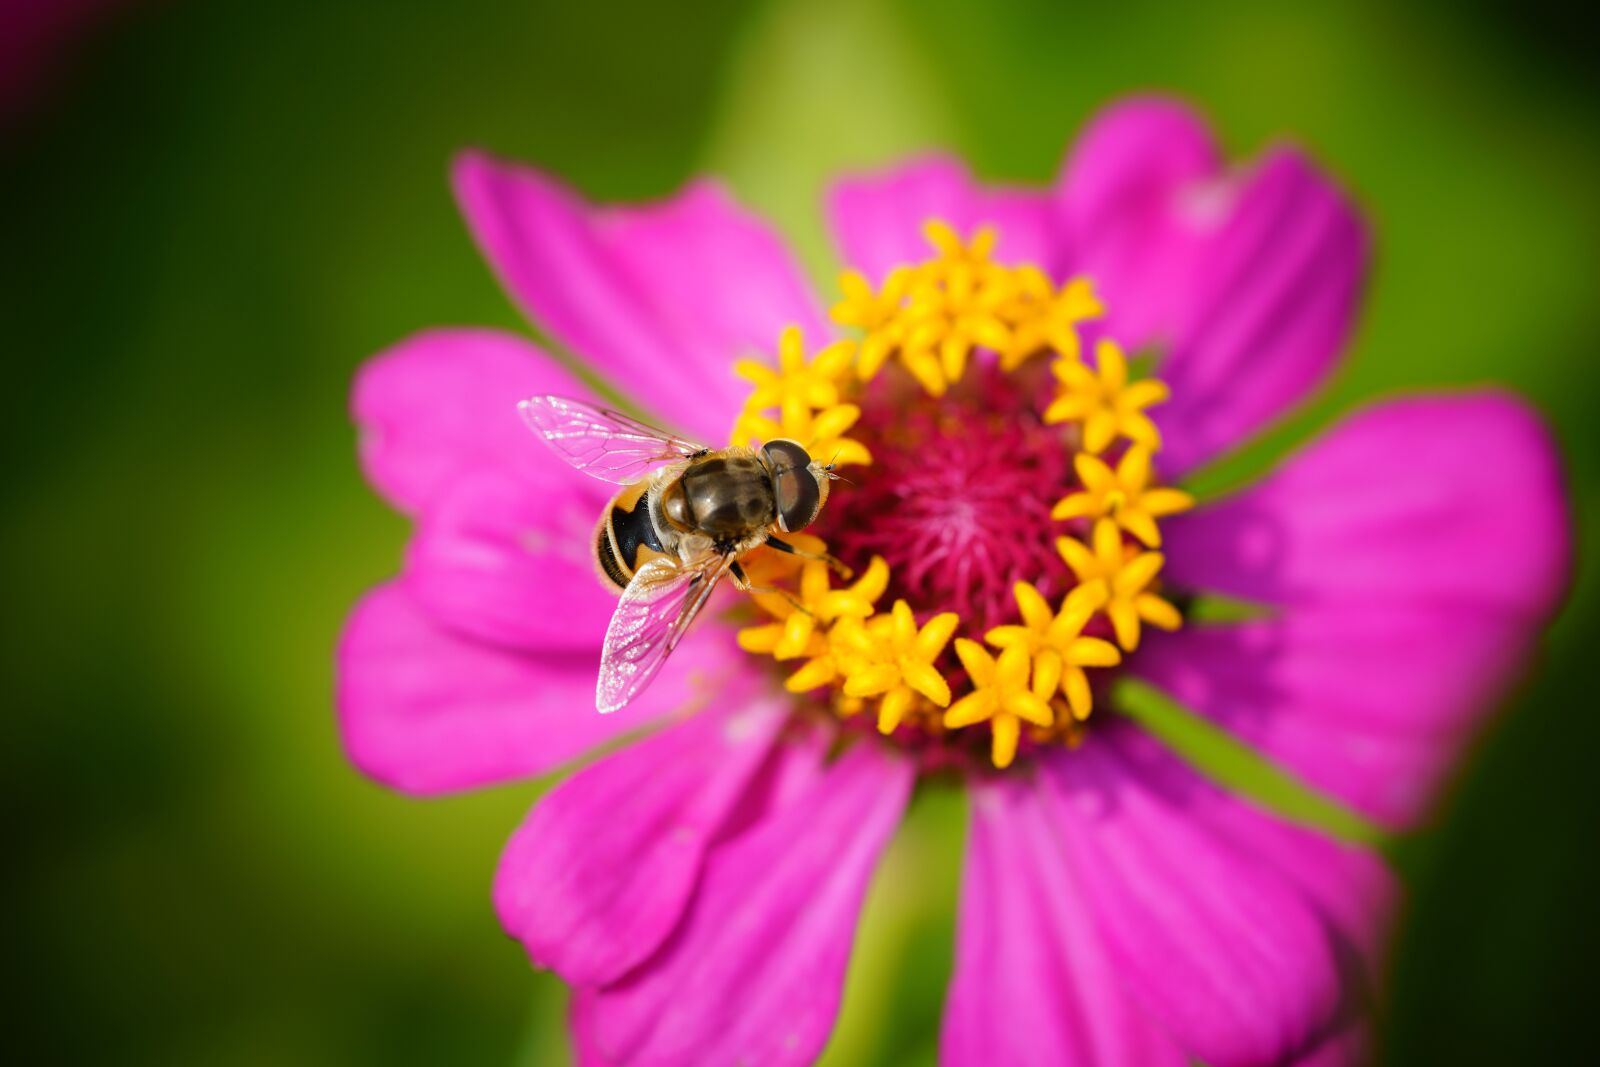 Sony a7R III sample photo. Bee, flower, nature photography